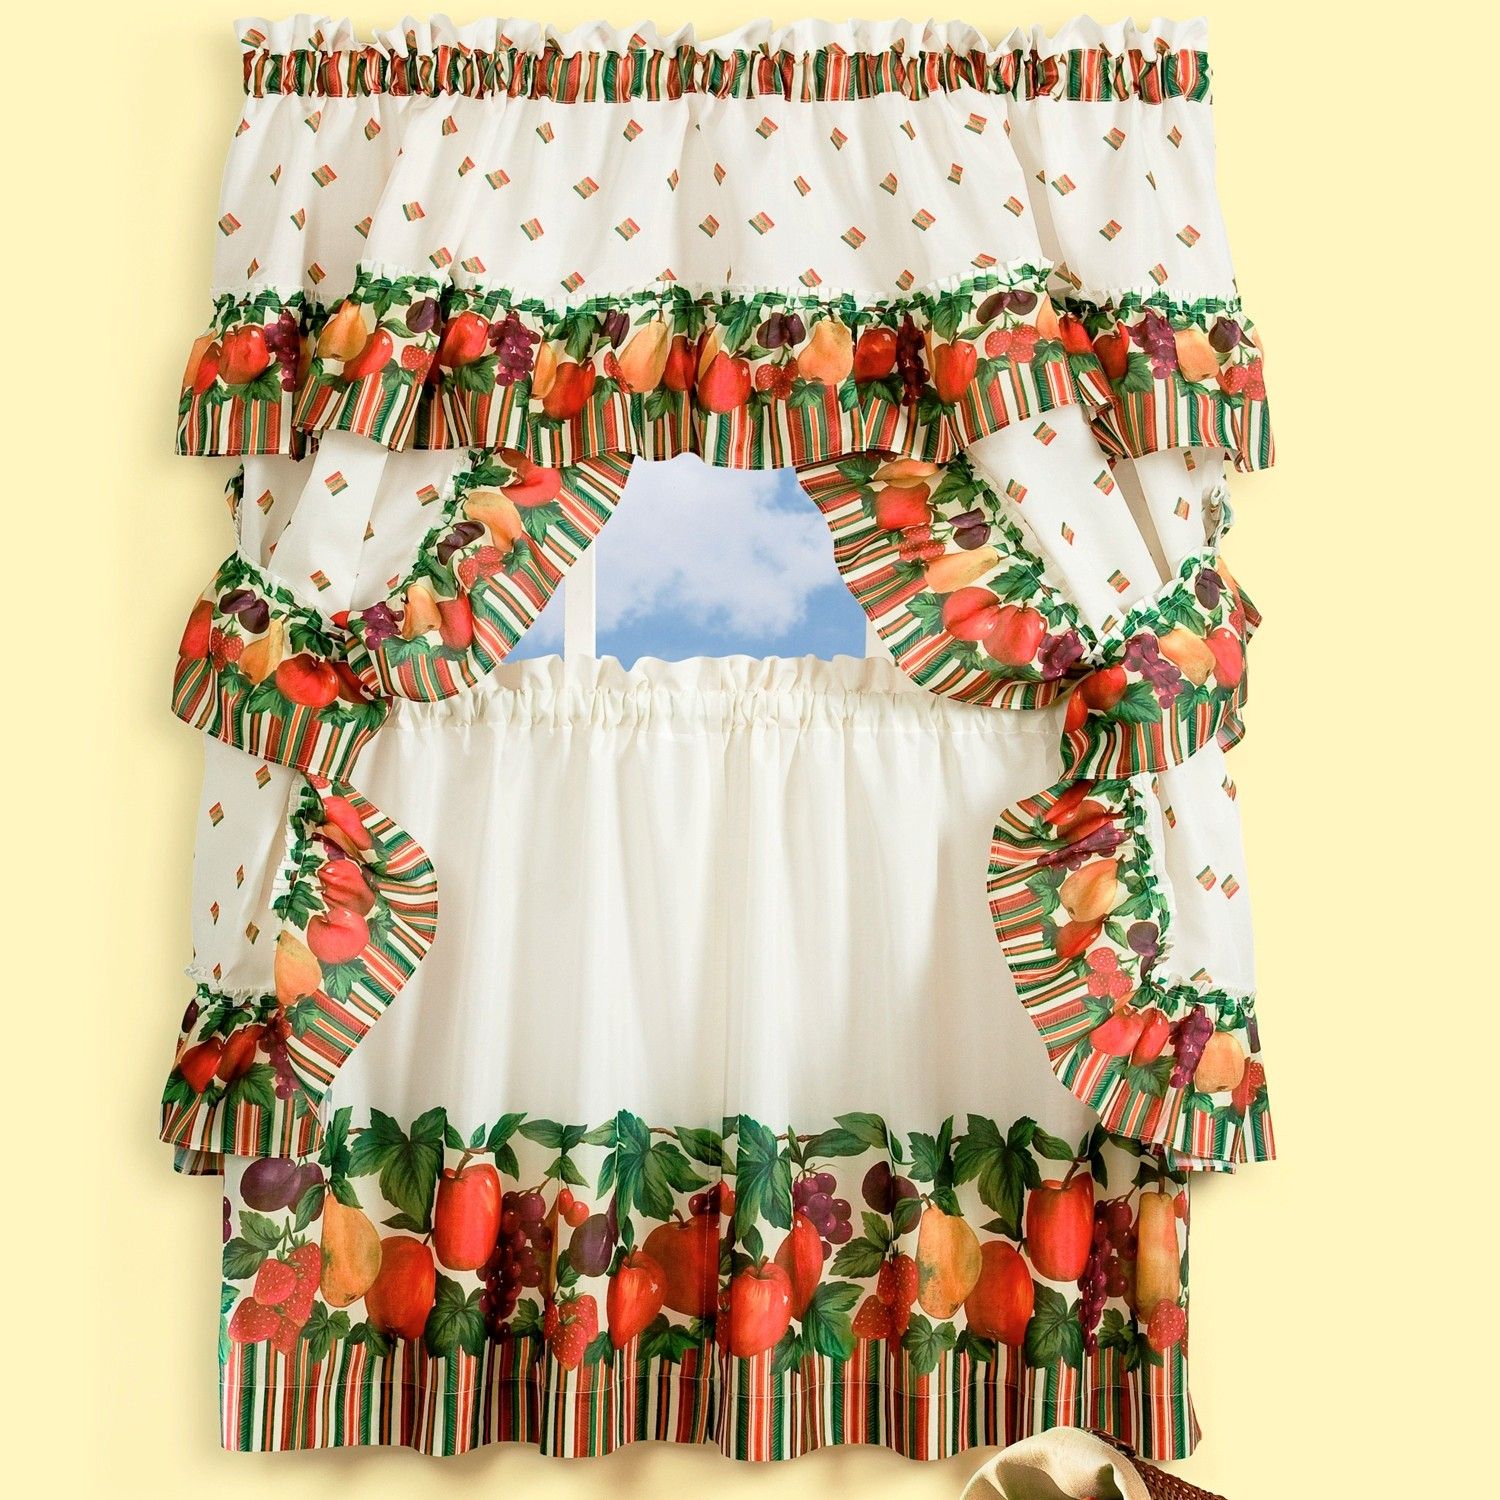 Tuttie Fruitie Printed Cottage Set – Printed Cottage Sets Throughout Top Of The Morning Printed Tailored Cottage Curtain Tier Sets (View 17 of 20)